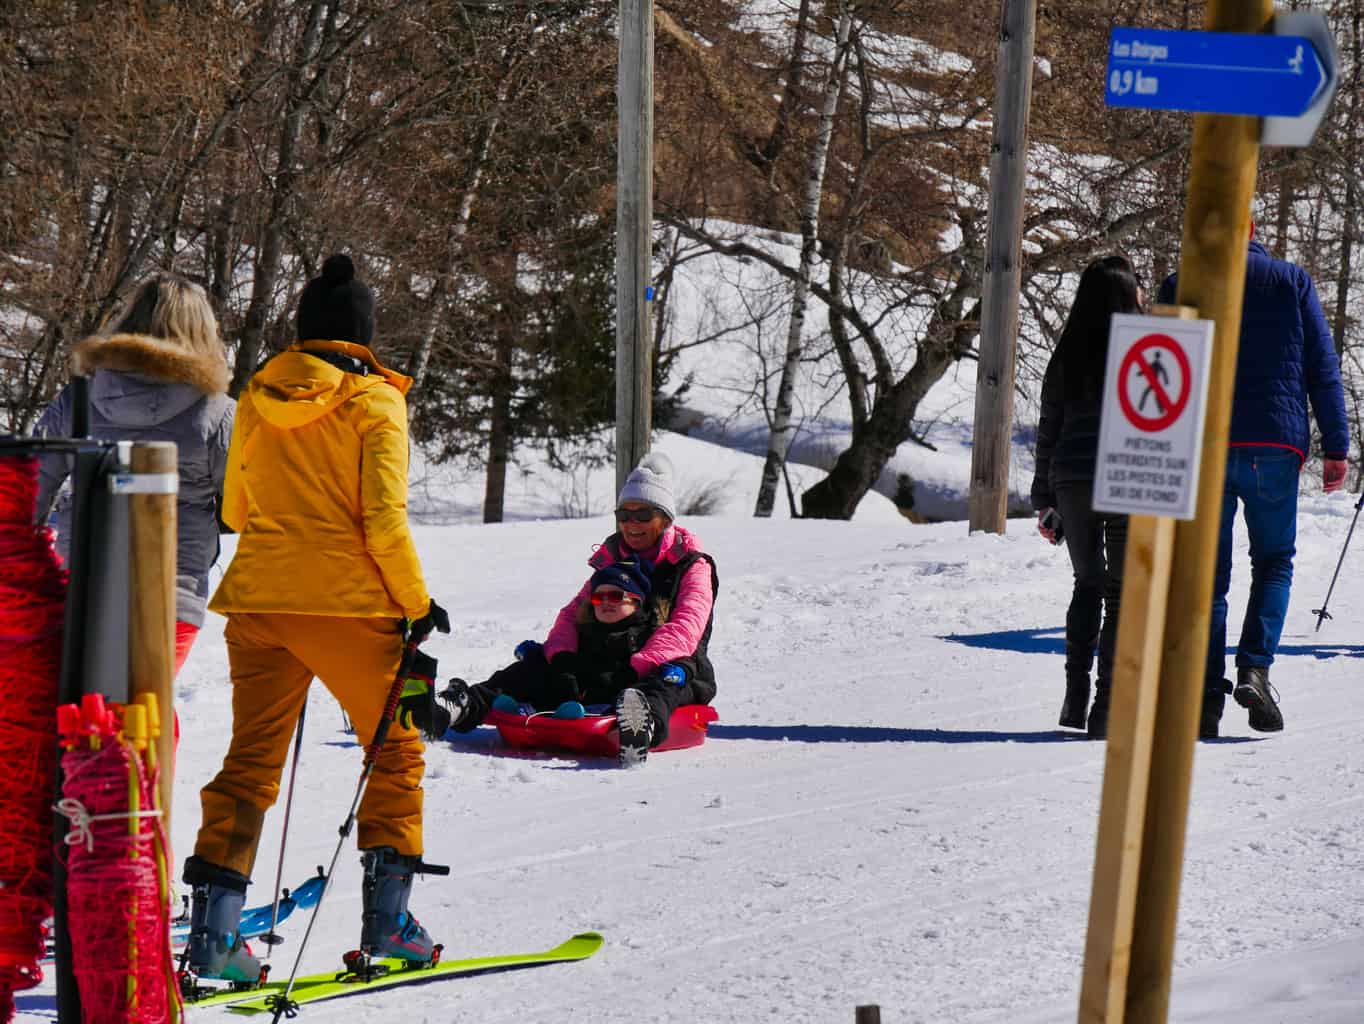 People sledging and skiing